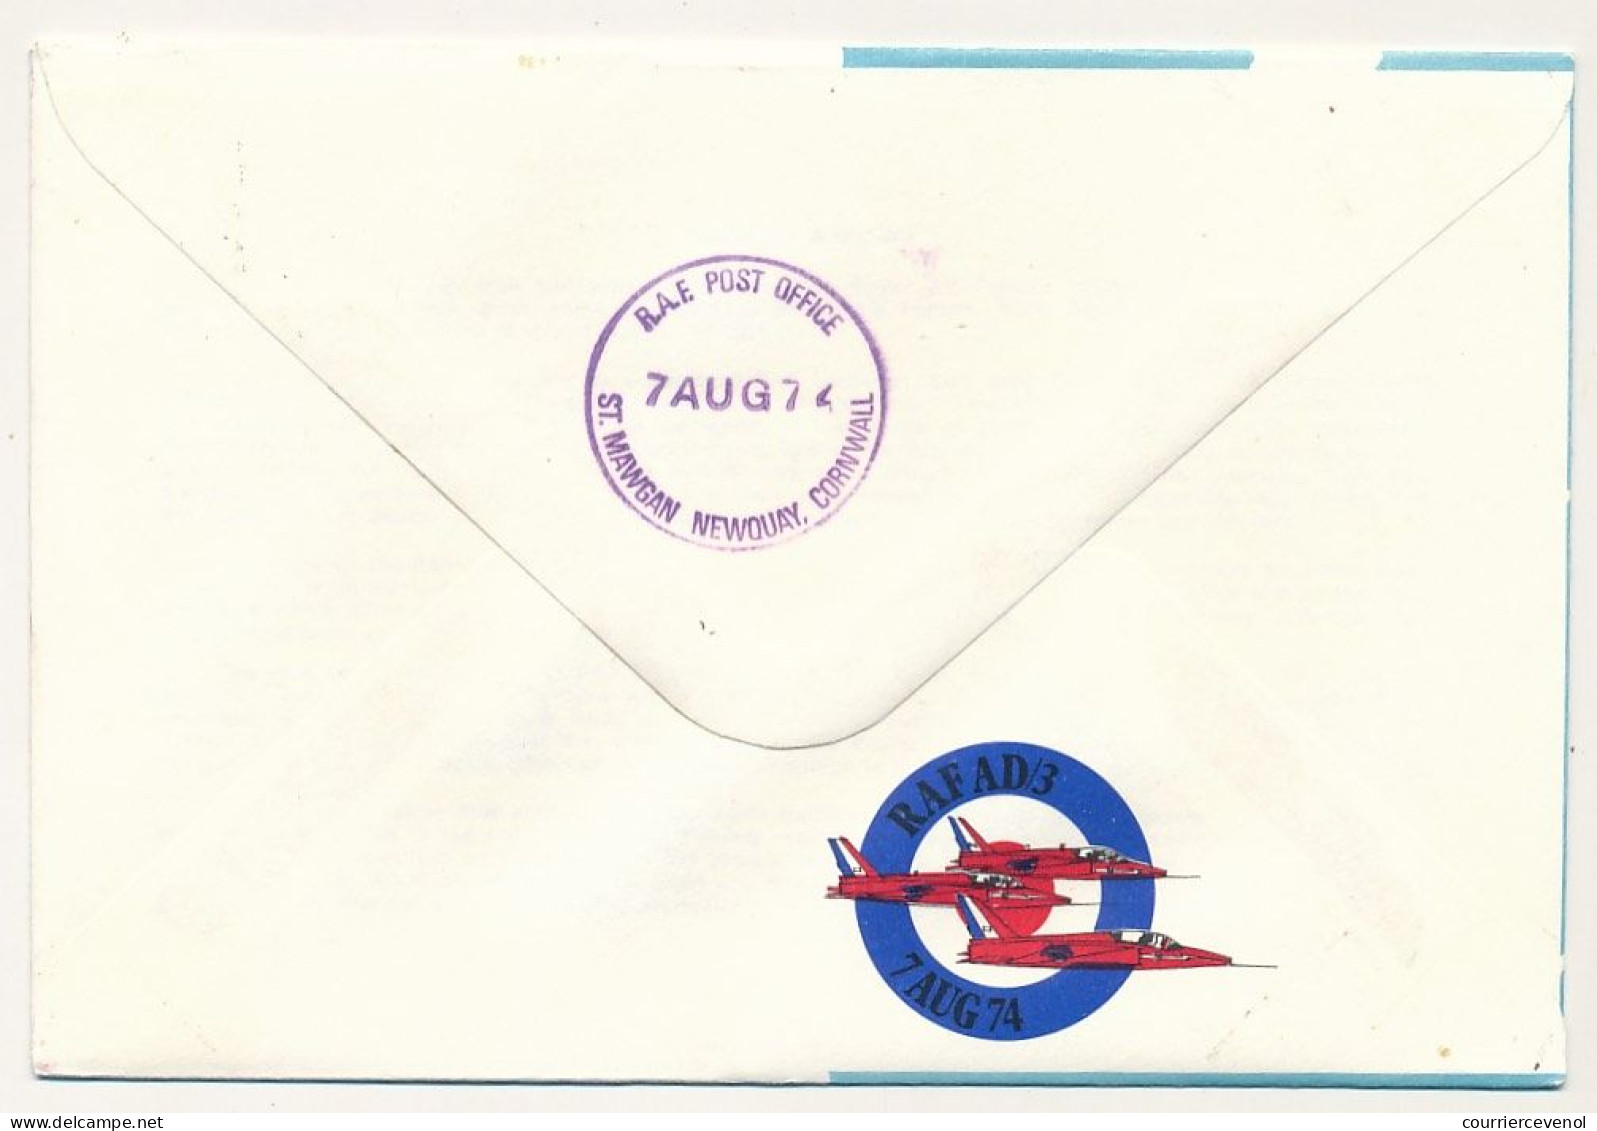 GRANDE BRETAGNE - Env. International Air Day Royal Air Force St Mawgan - 7 Aout 1974 - British Forces Postal Service - Covers & Documents